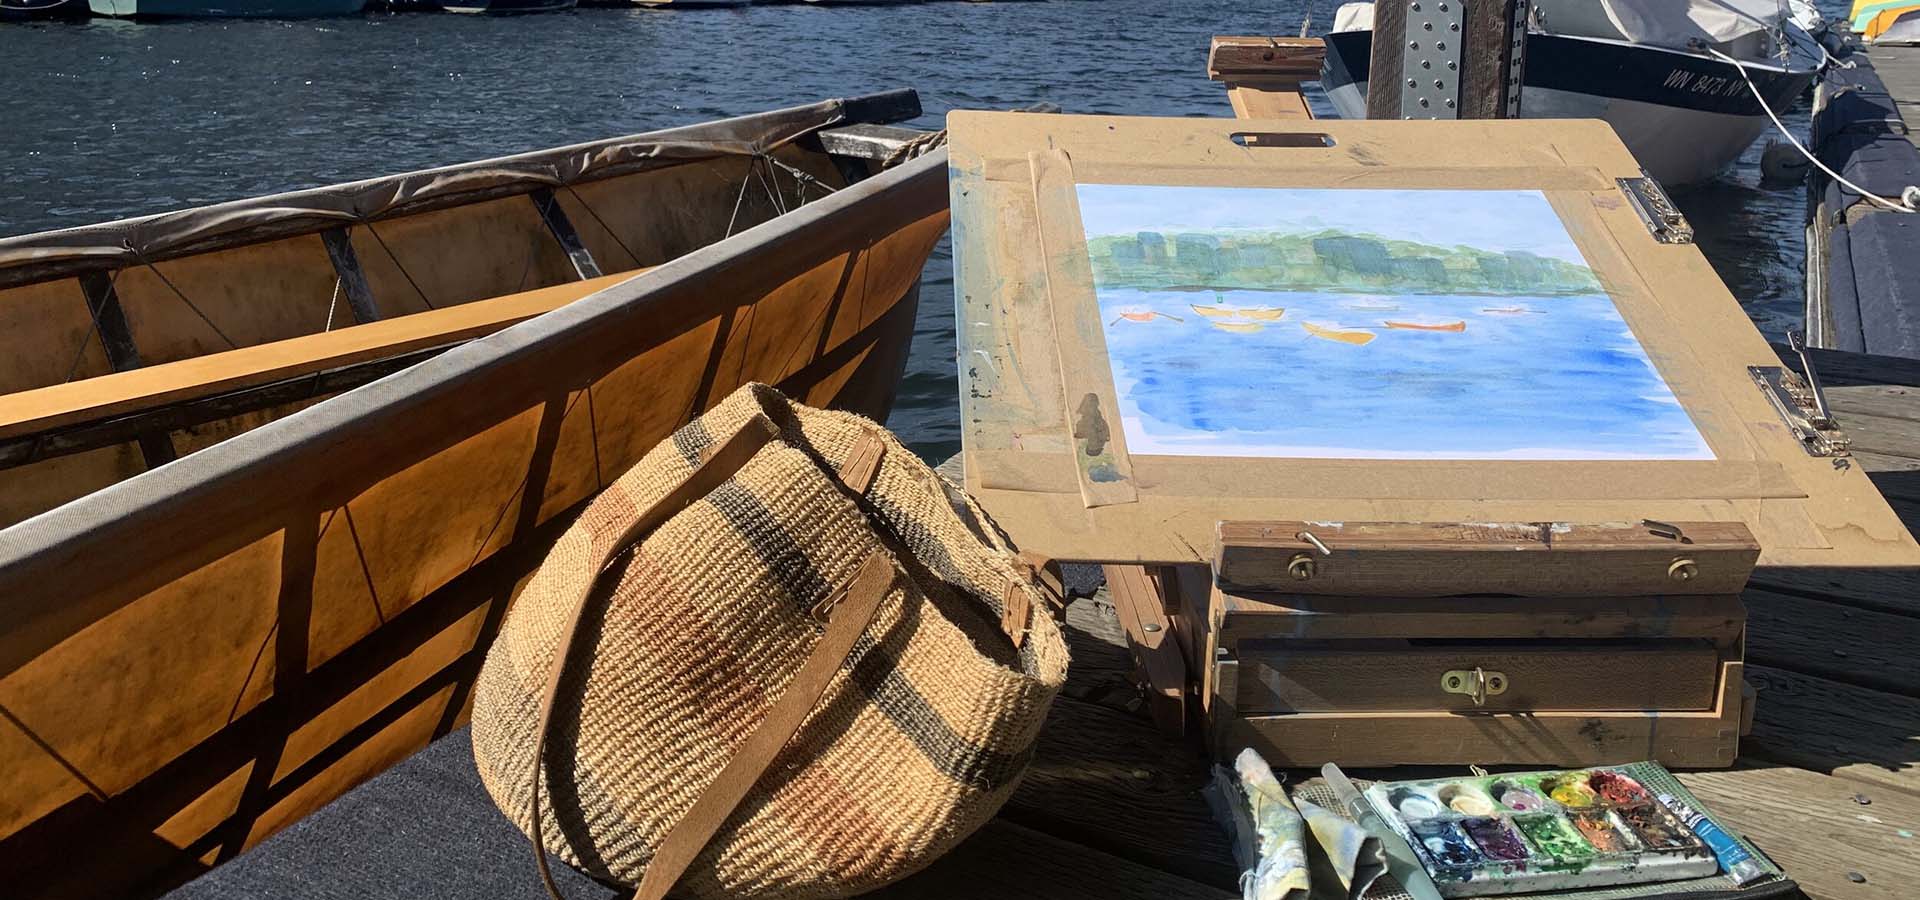 Watercolor of a lake with boats in progress with paint supplies scattered around.